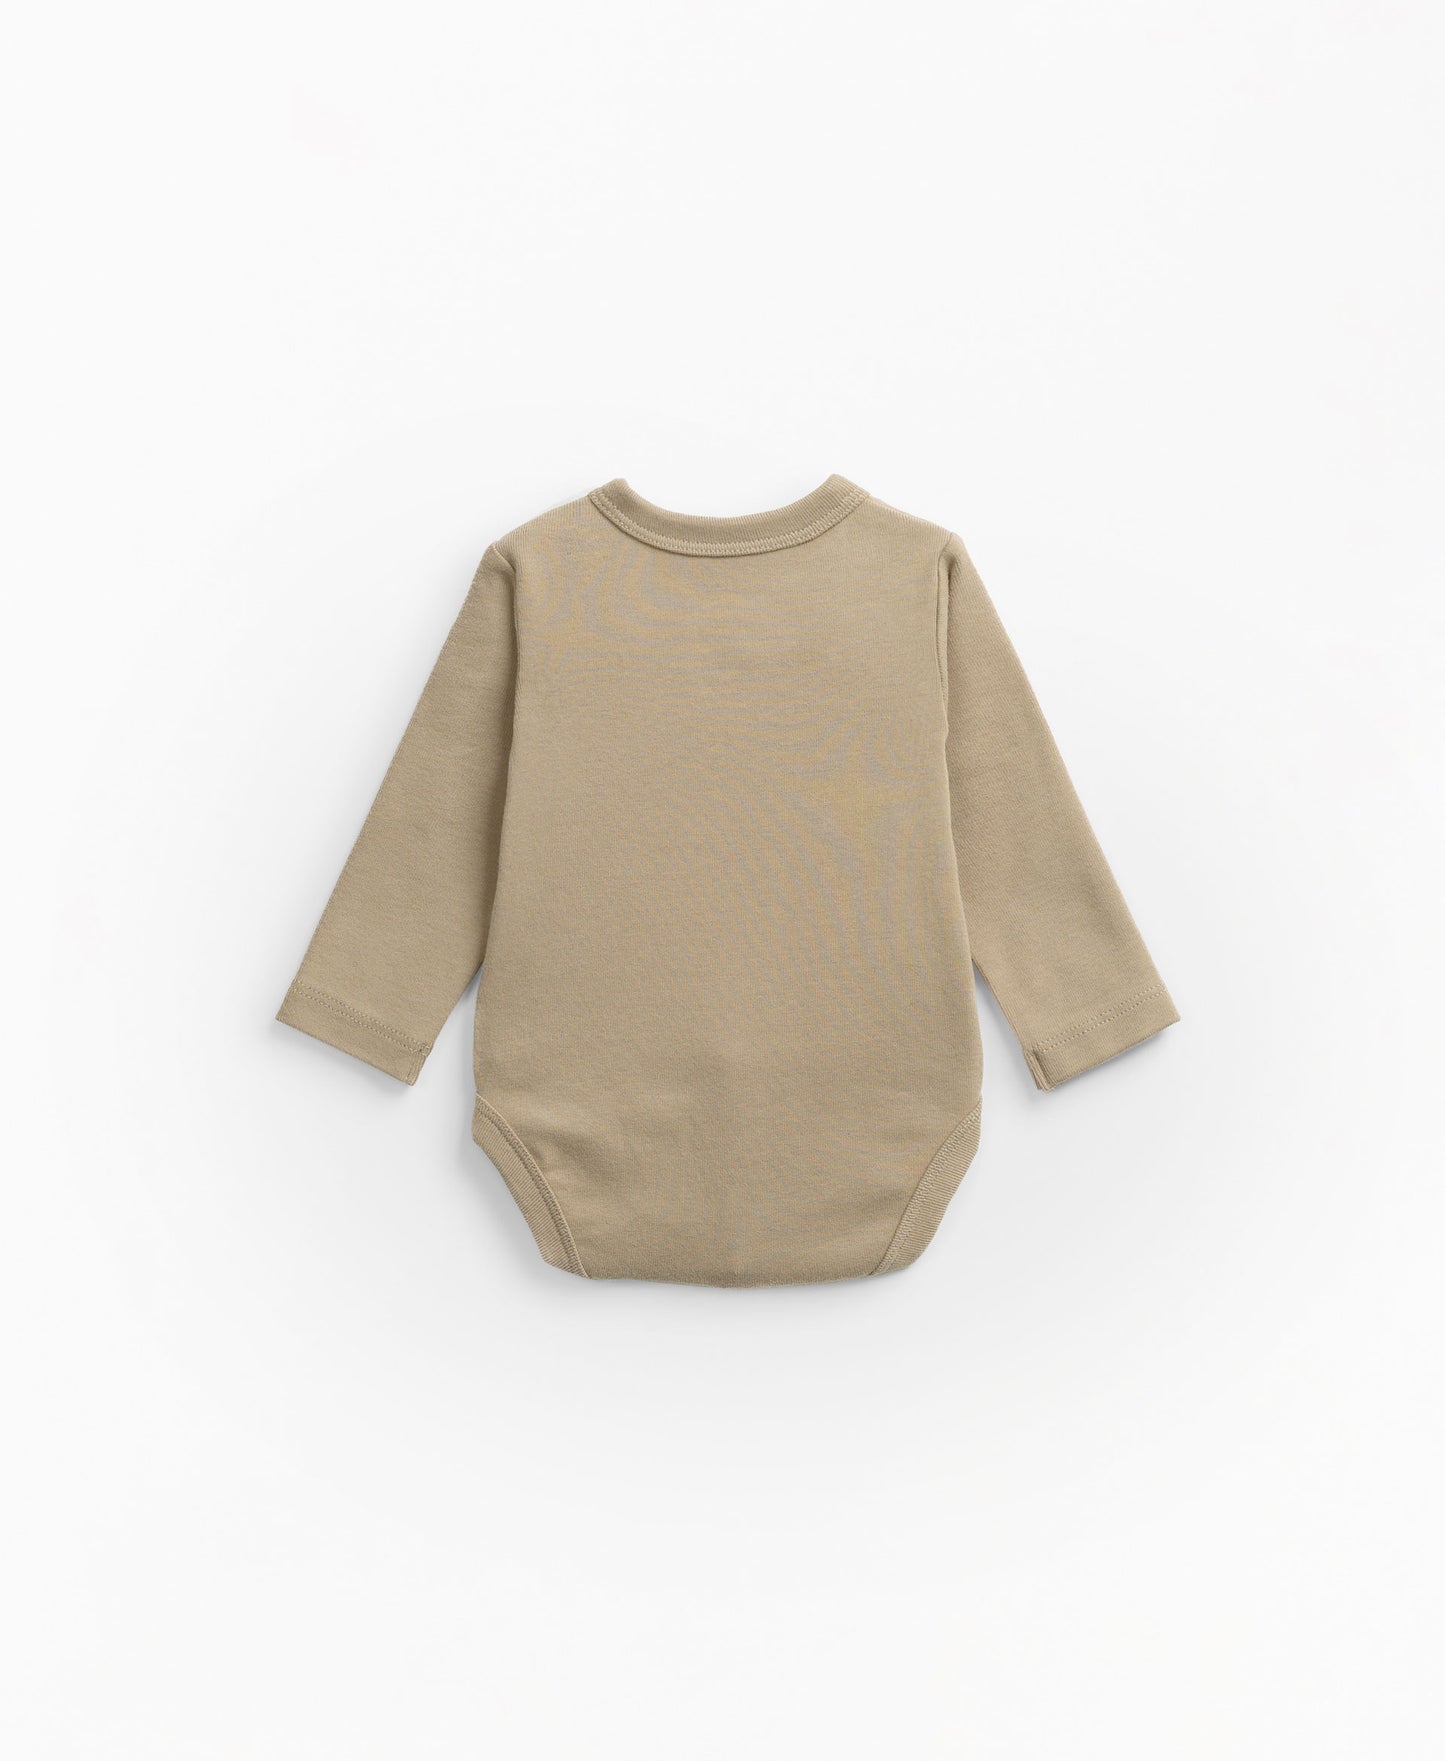 Play Up, Body in mixture of organic and recycled cotton | Mother Lúcia